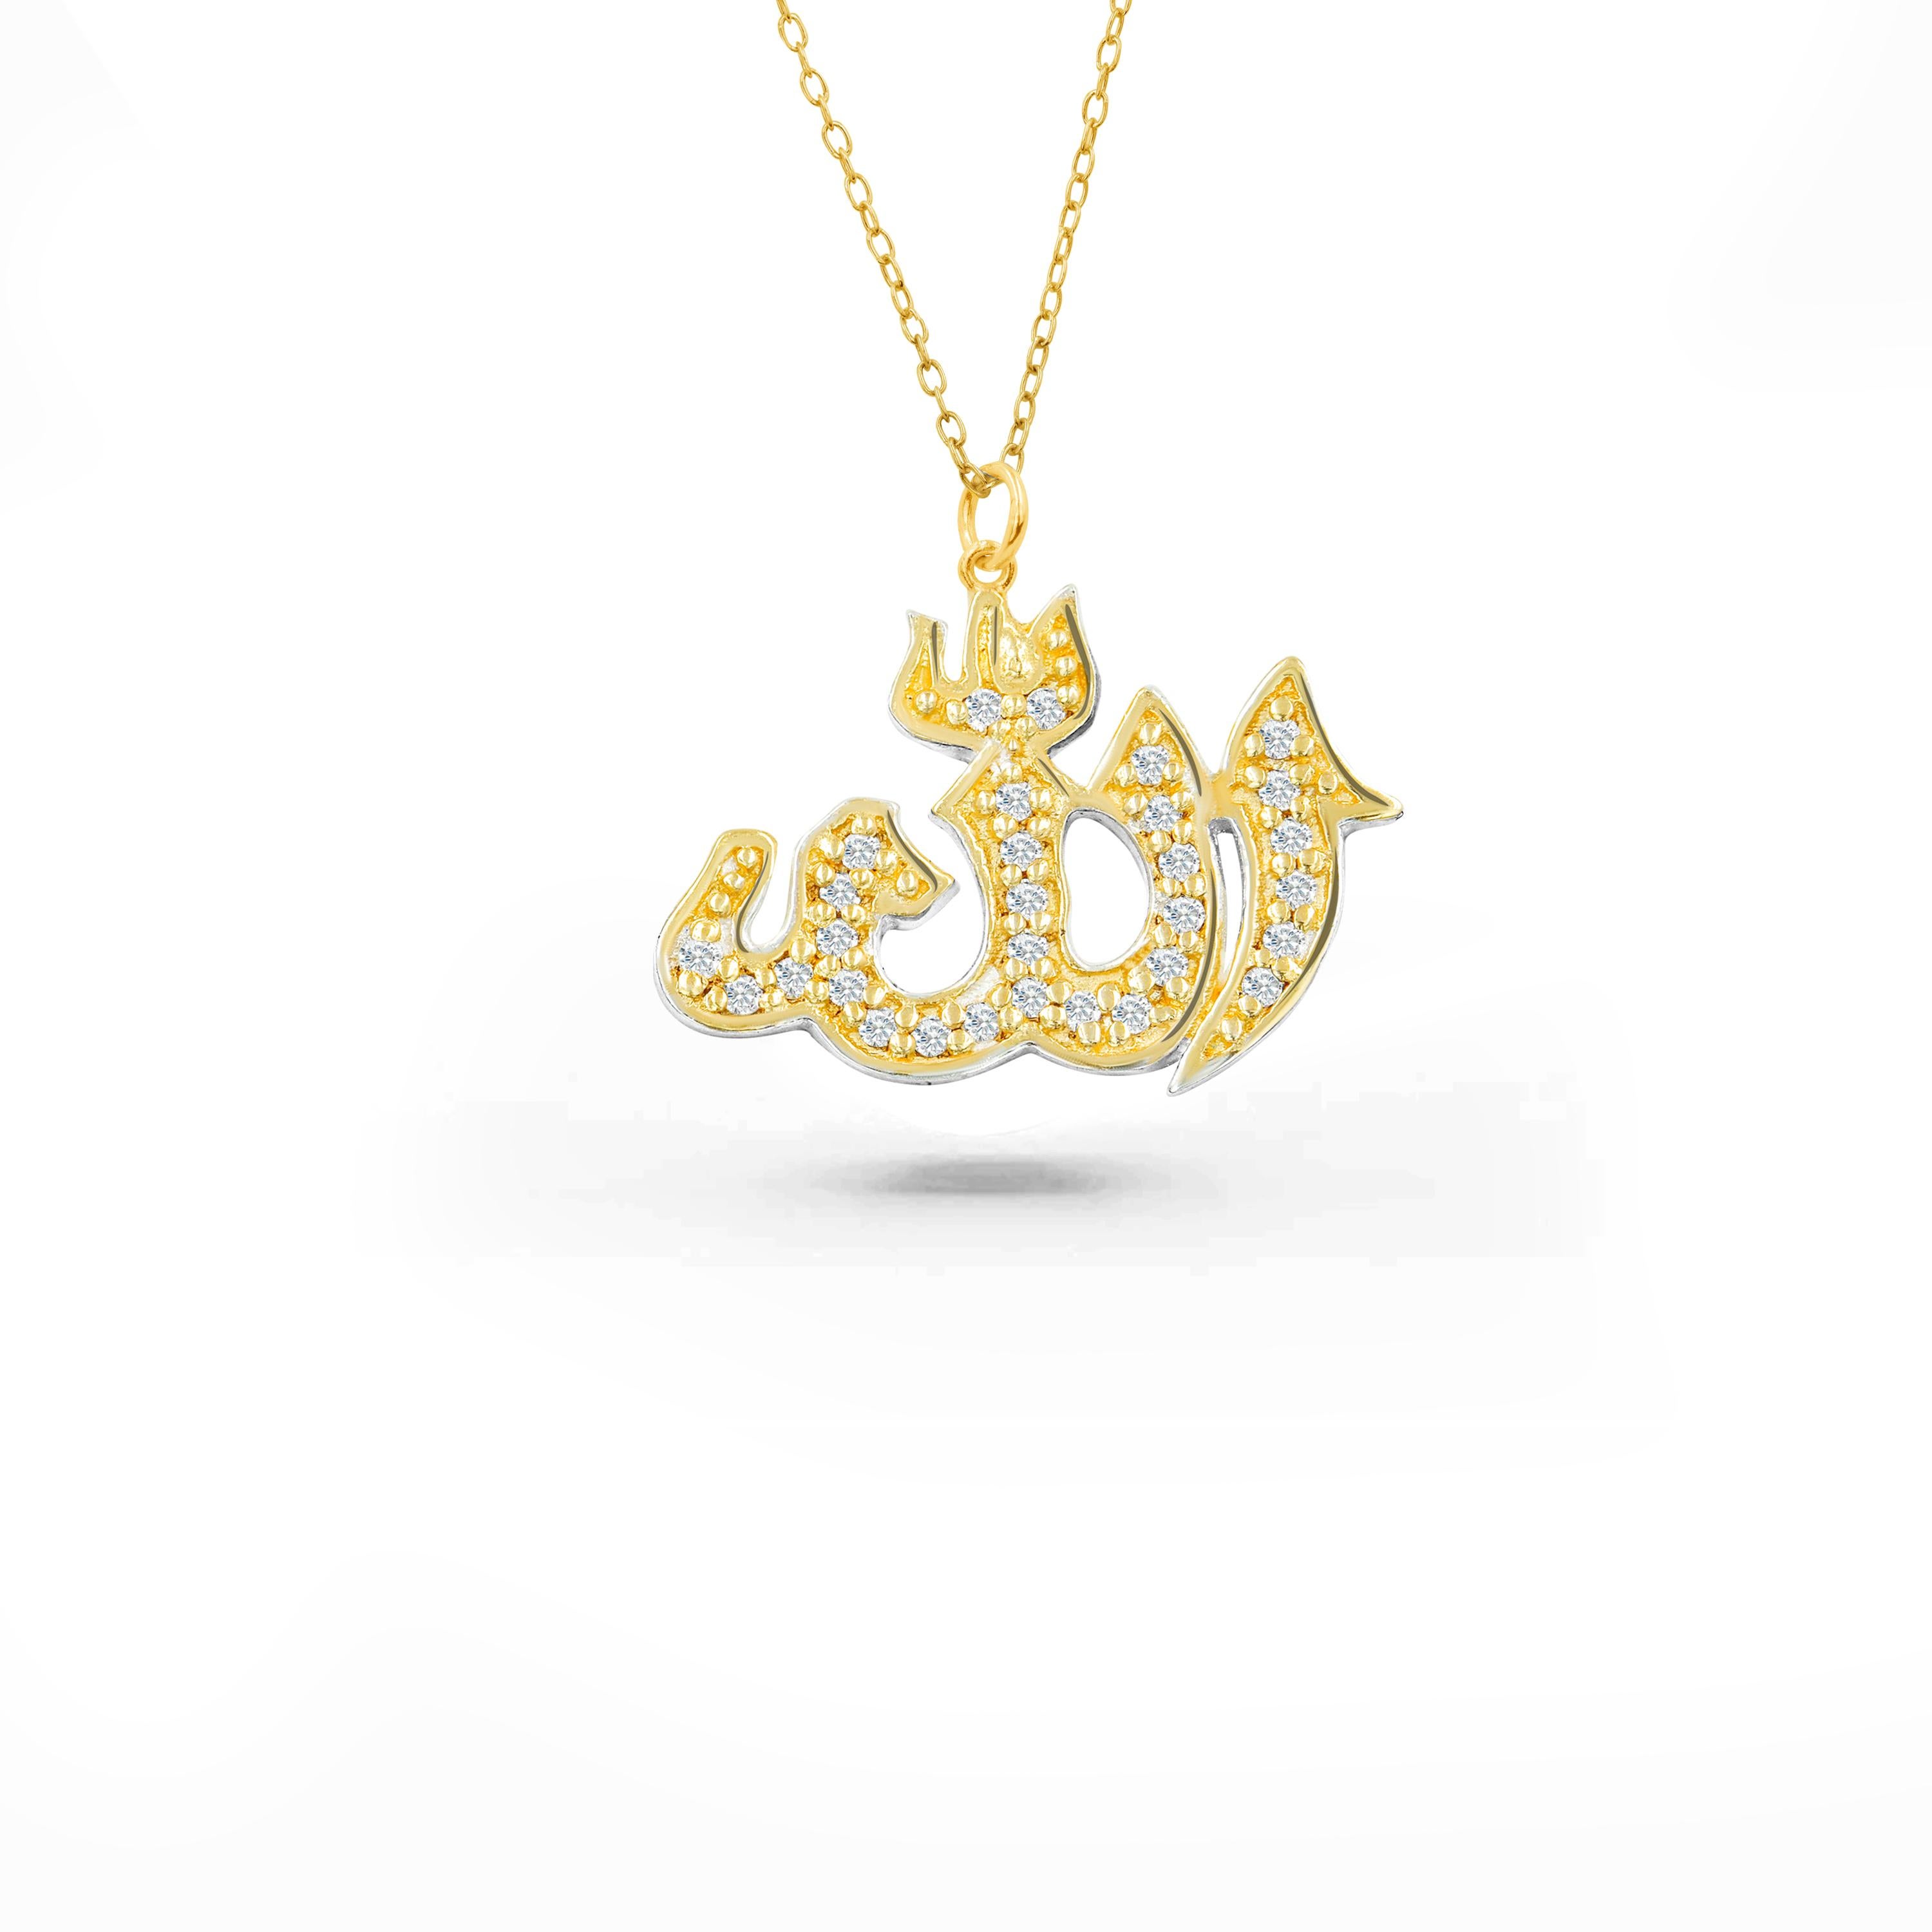 Handcrafted Allah diamond necklace is a perfect everyday wear necklace to bring inner peace and spirituality. This beautiful Allah religious necklace is a statement piece that is made in Thailand with love and care. This Islam necklace can be